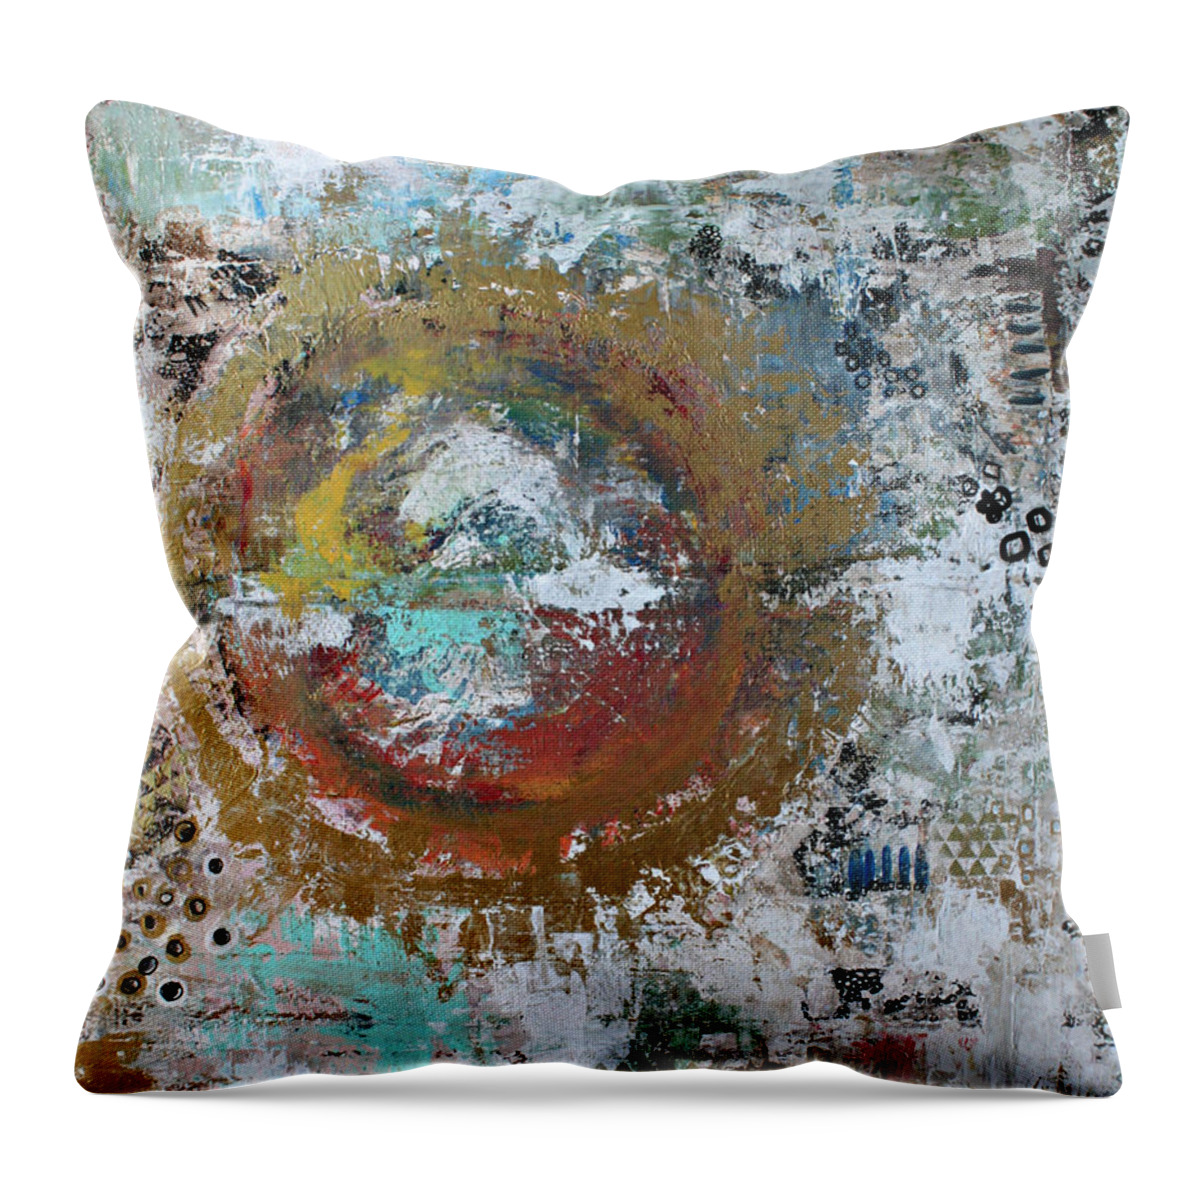 Abstract Painting Throw Pillow featuring the painting Abstract Paintng by Alma Yamazaki